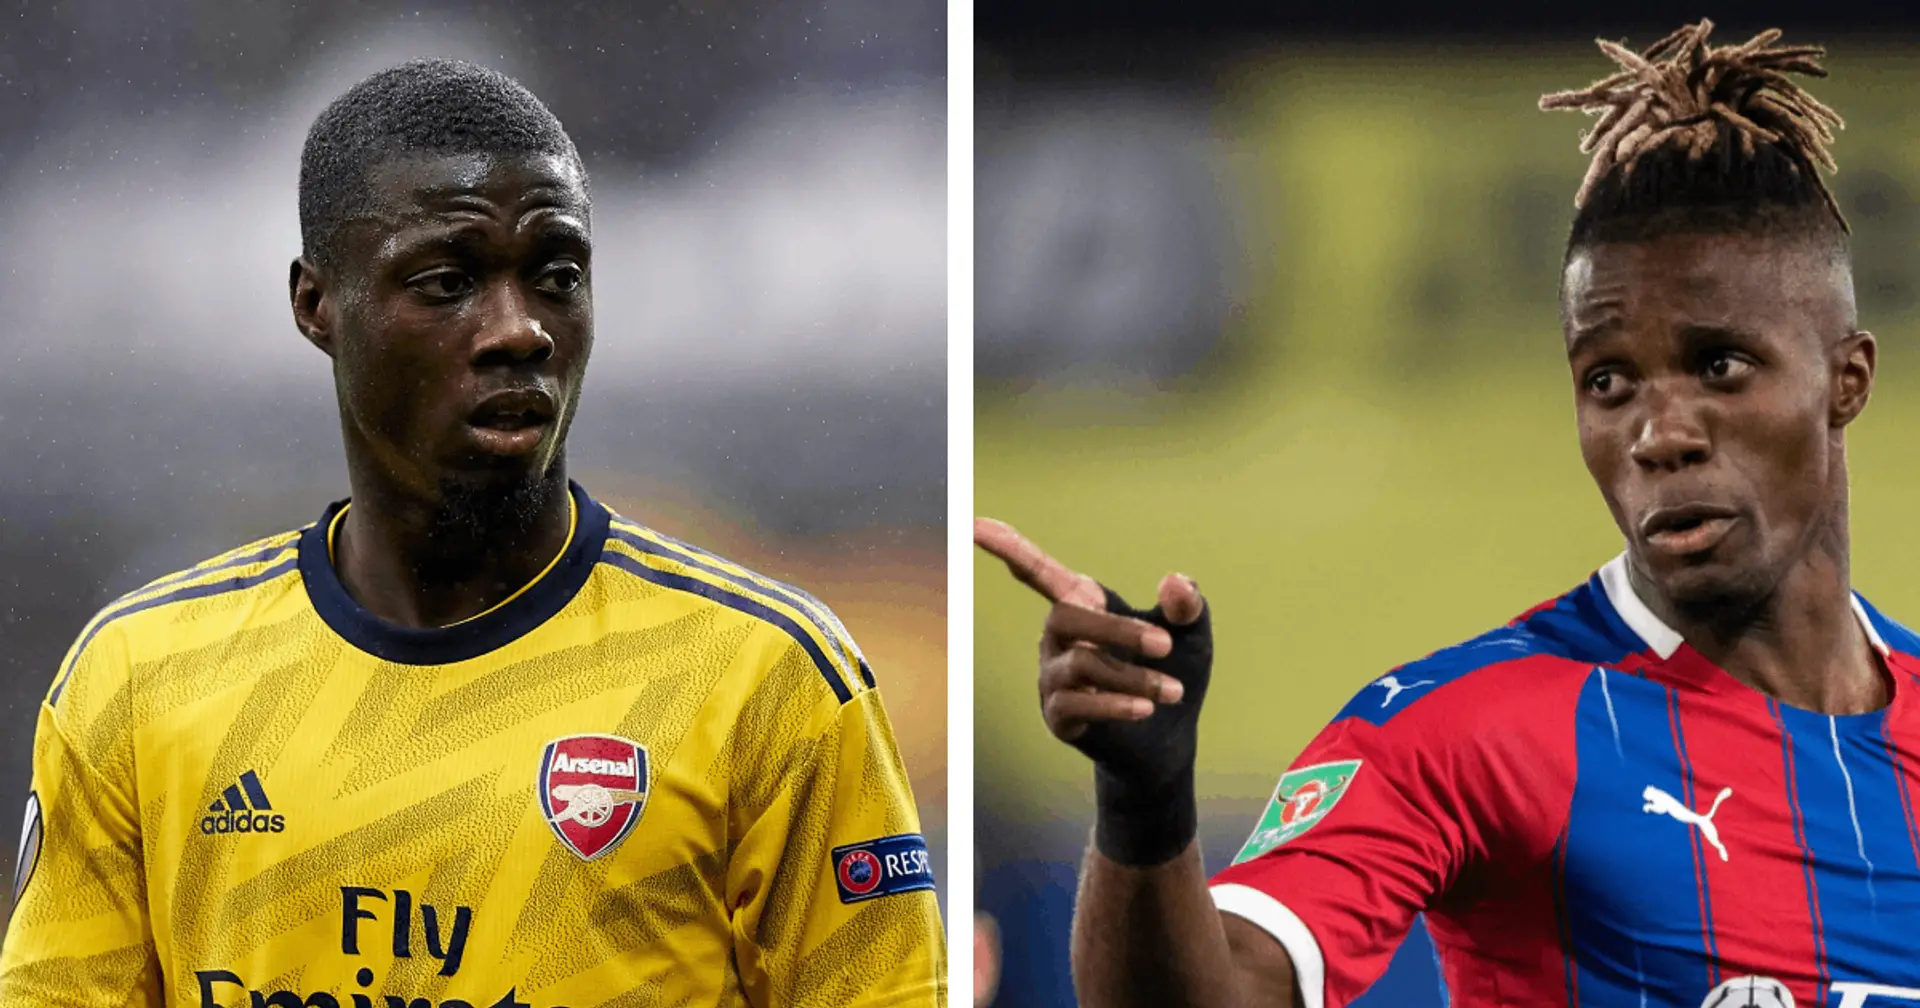 'He sounded like a motorbike': Wilfried Zaha reveals he had to change the room because of Nicolas Pepe's snore